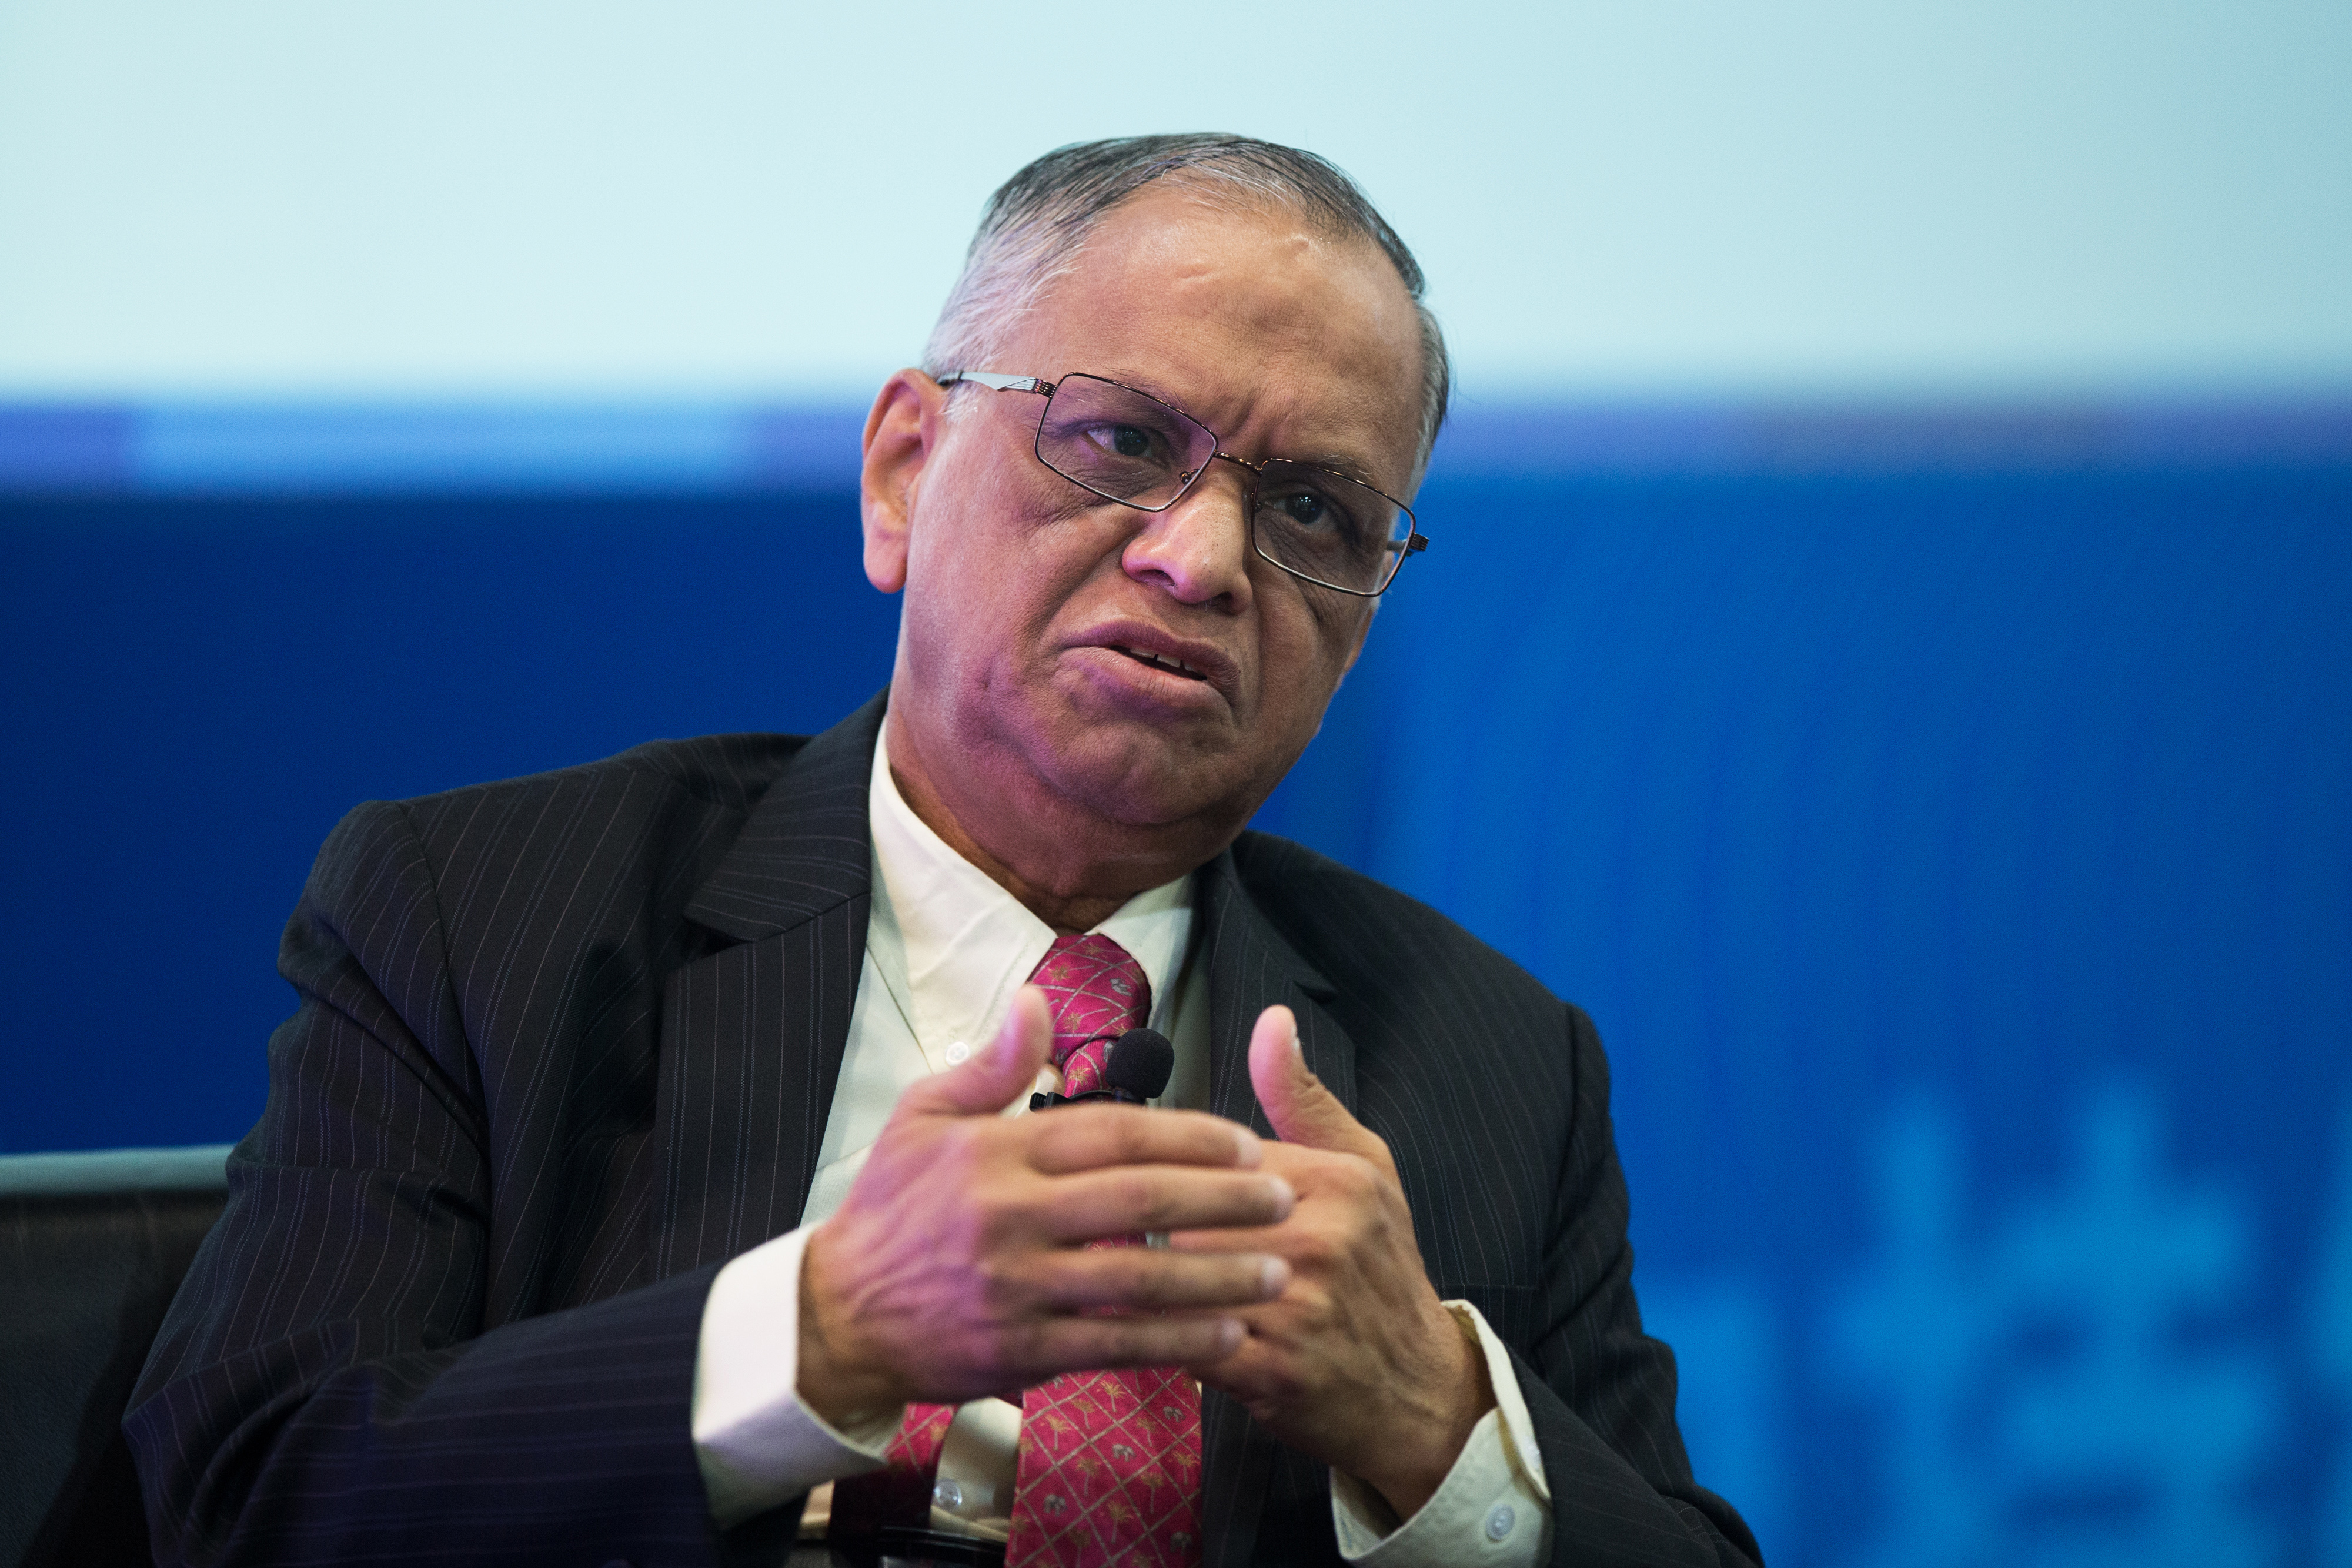 N.R. Narayana Murthy, co-founder and chairman of Infosys, gestures as he speaks during the Hong Kong Asian Financial Forum in Hong Kong on Jan. 19, 2015 (Jerome Favre—Bloomberg/Getty Images)